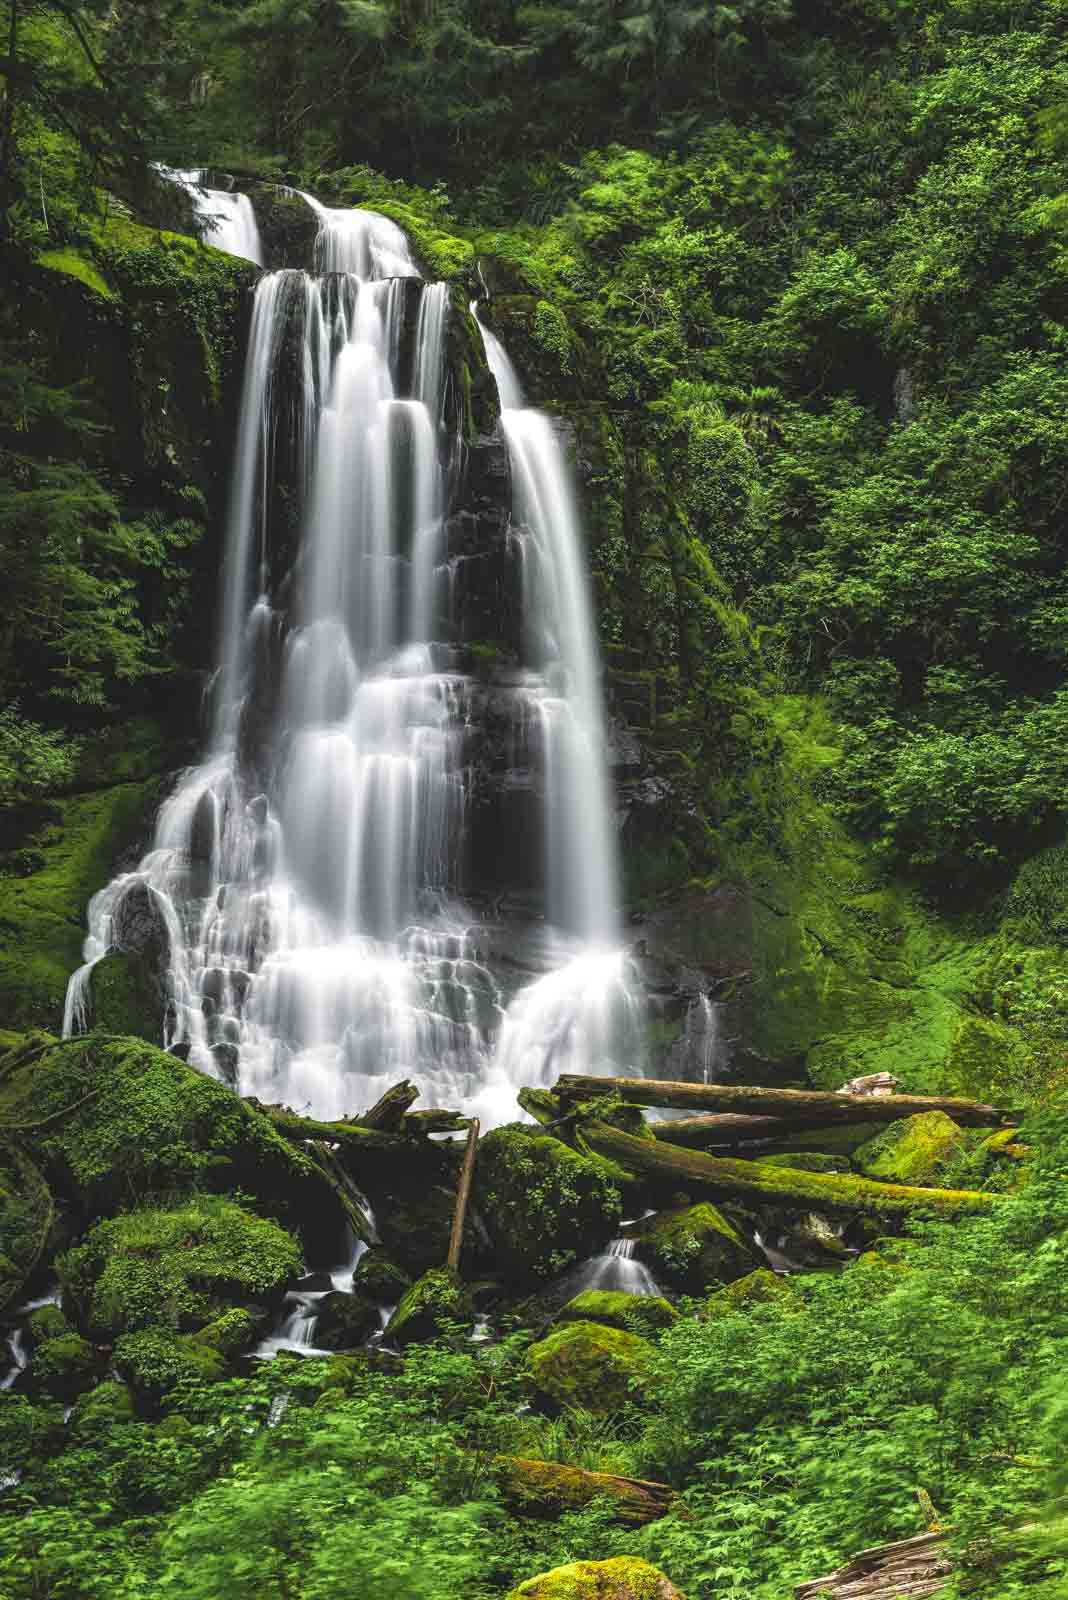 Kentucky Falls is an Oregon waterfall hike that will reward you with some pretty views.